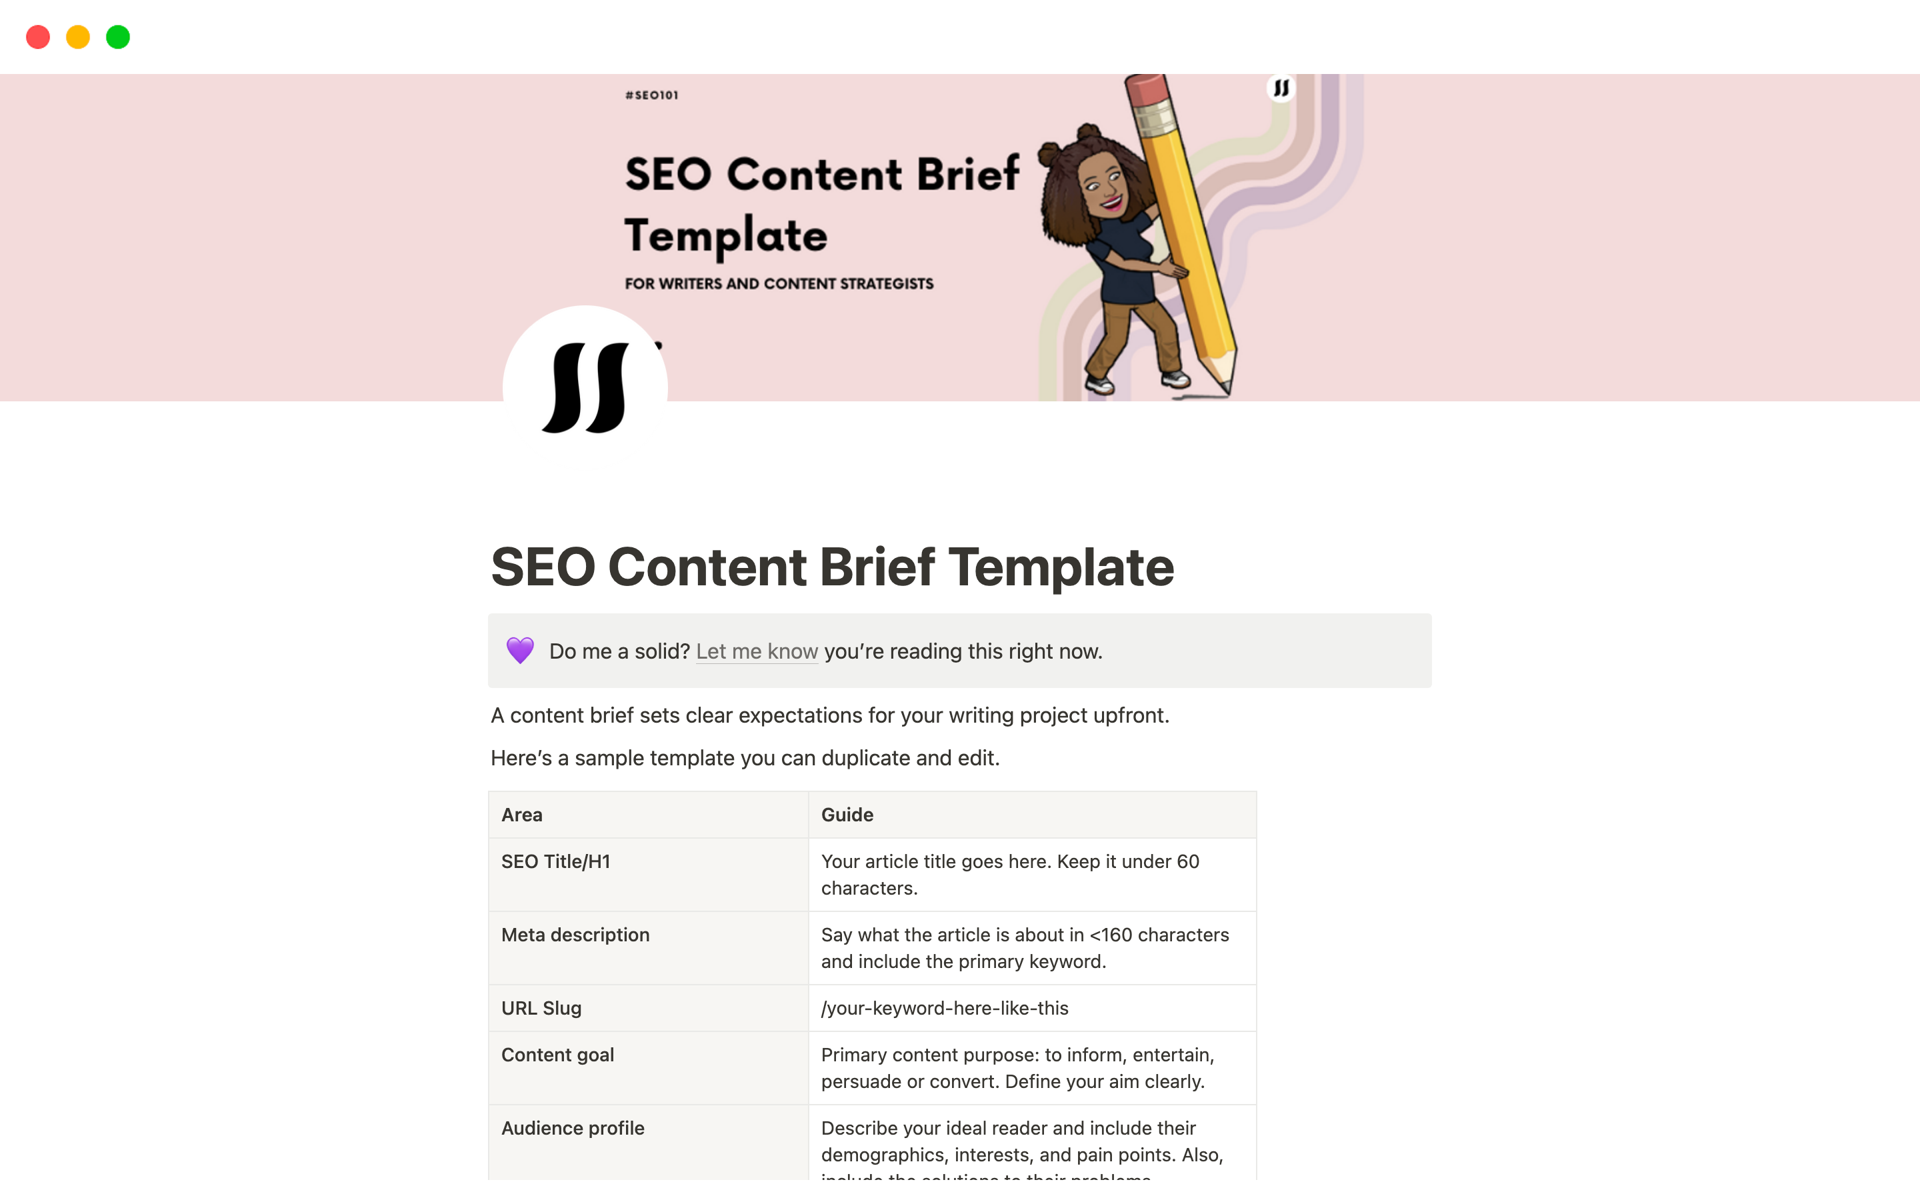 SEO Content Writing Brief Template for Writers and Content Strategists